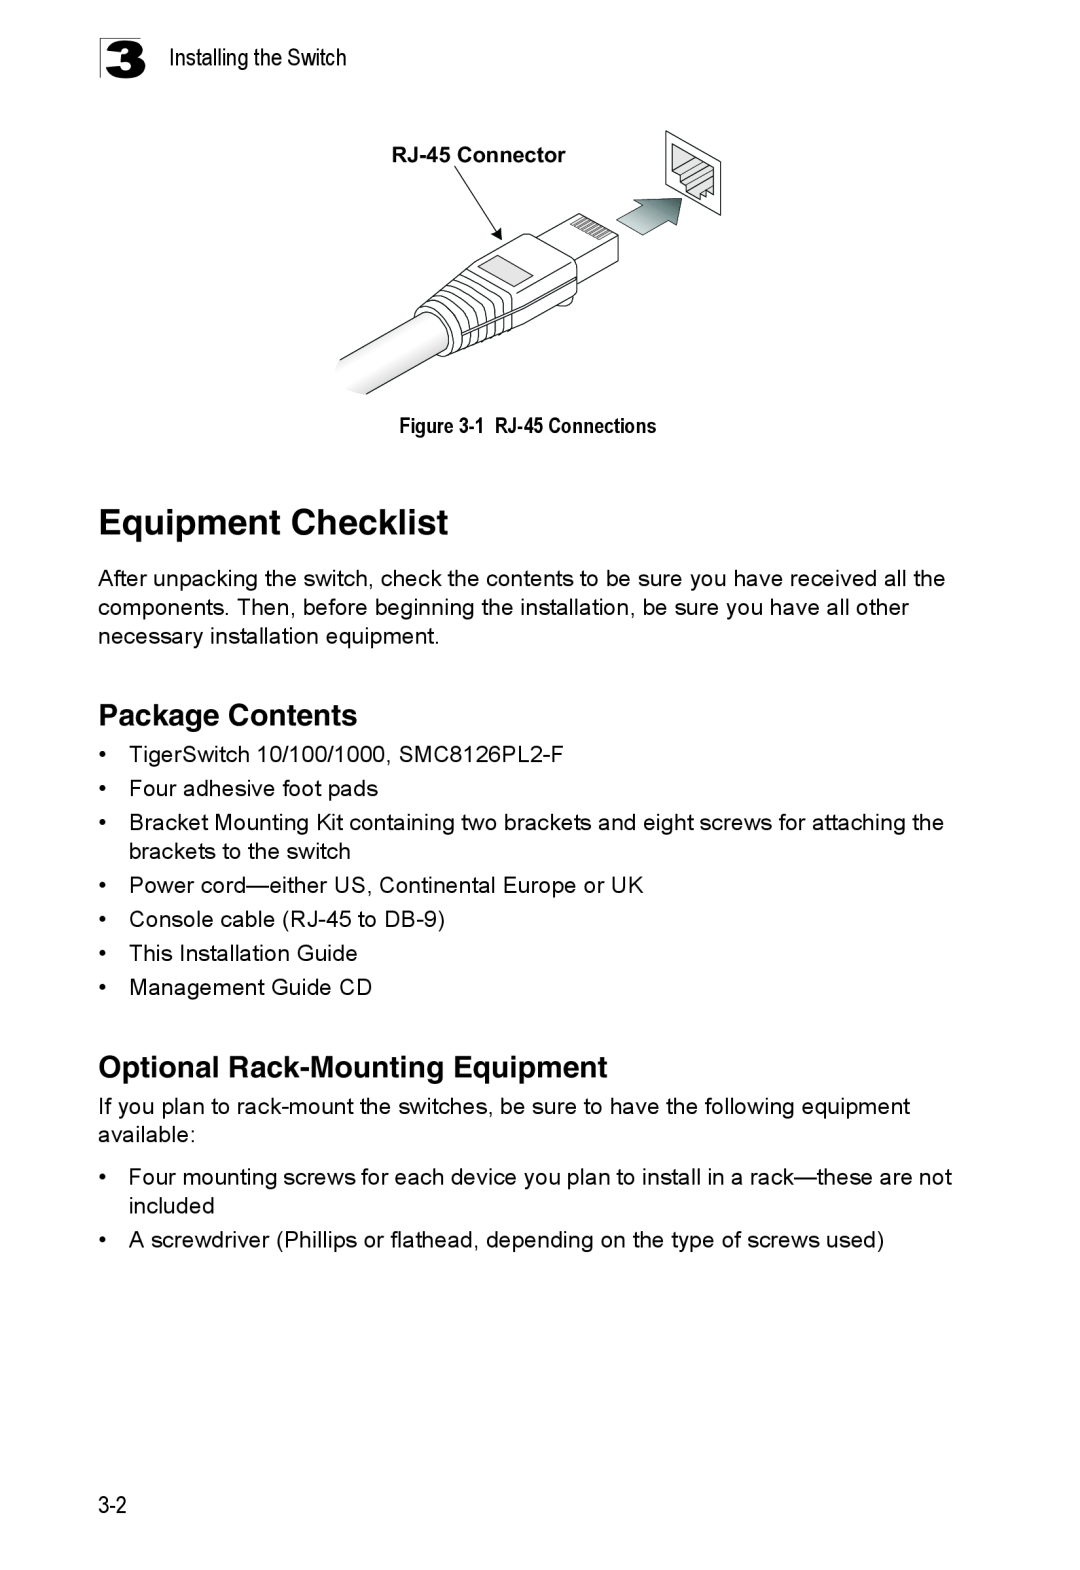 SMC Networks SMC8126PL2-F manual Equipment Checklist, Package Contents, Optional Rack-MountingEquipment 